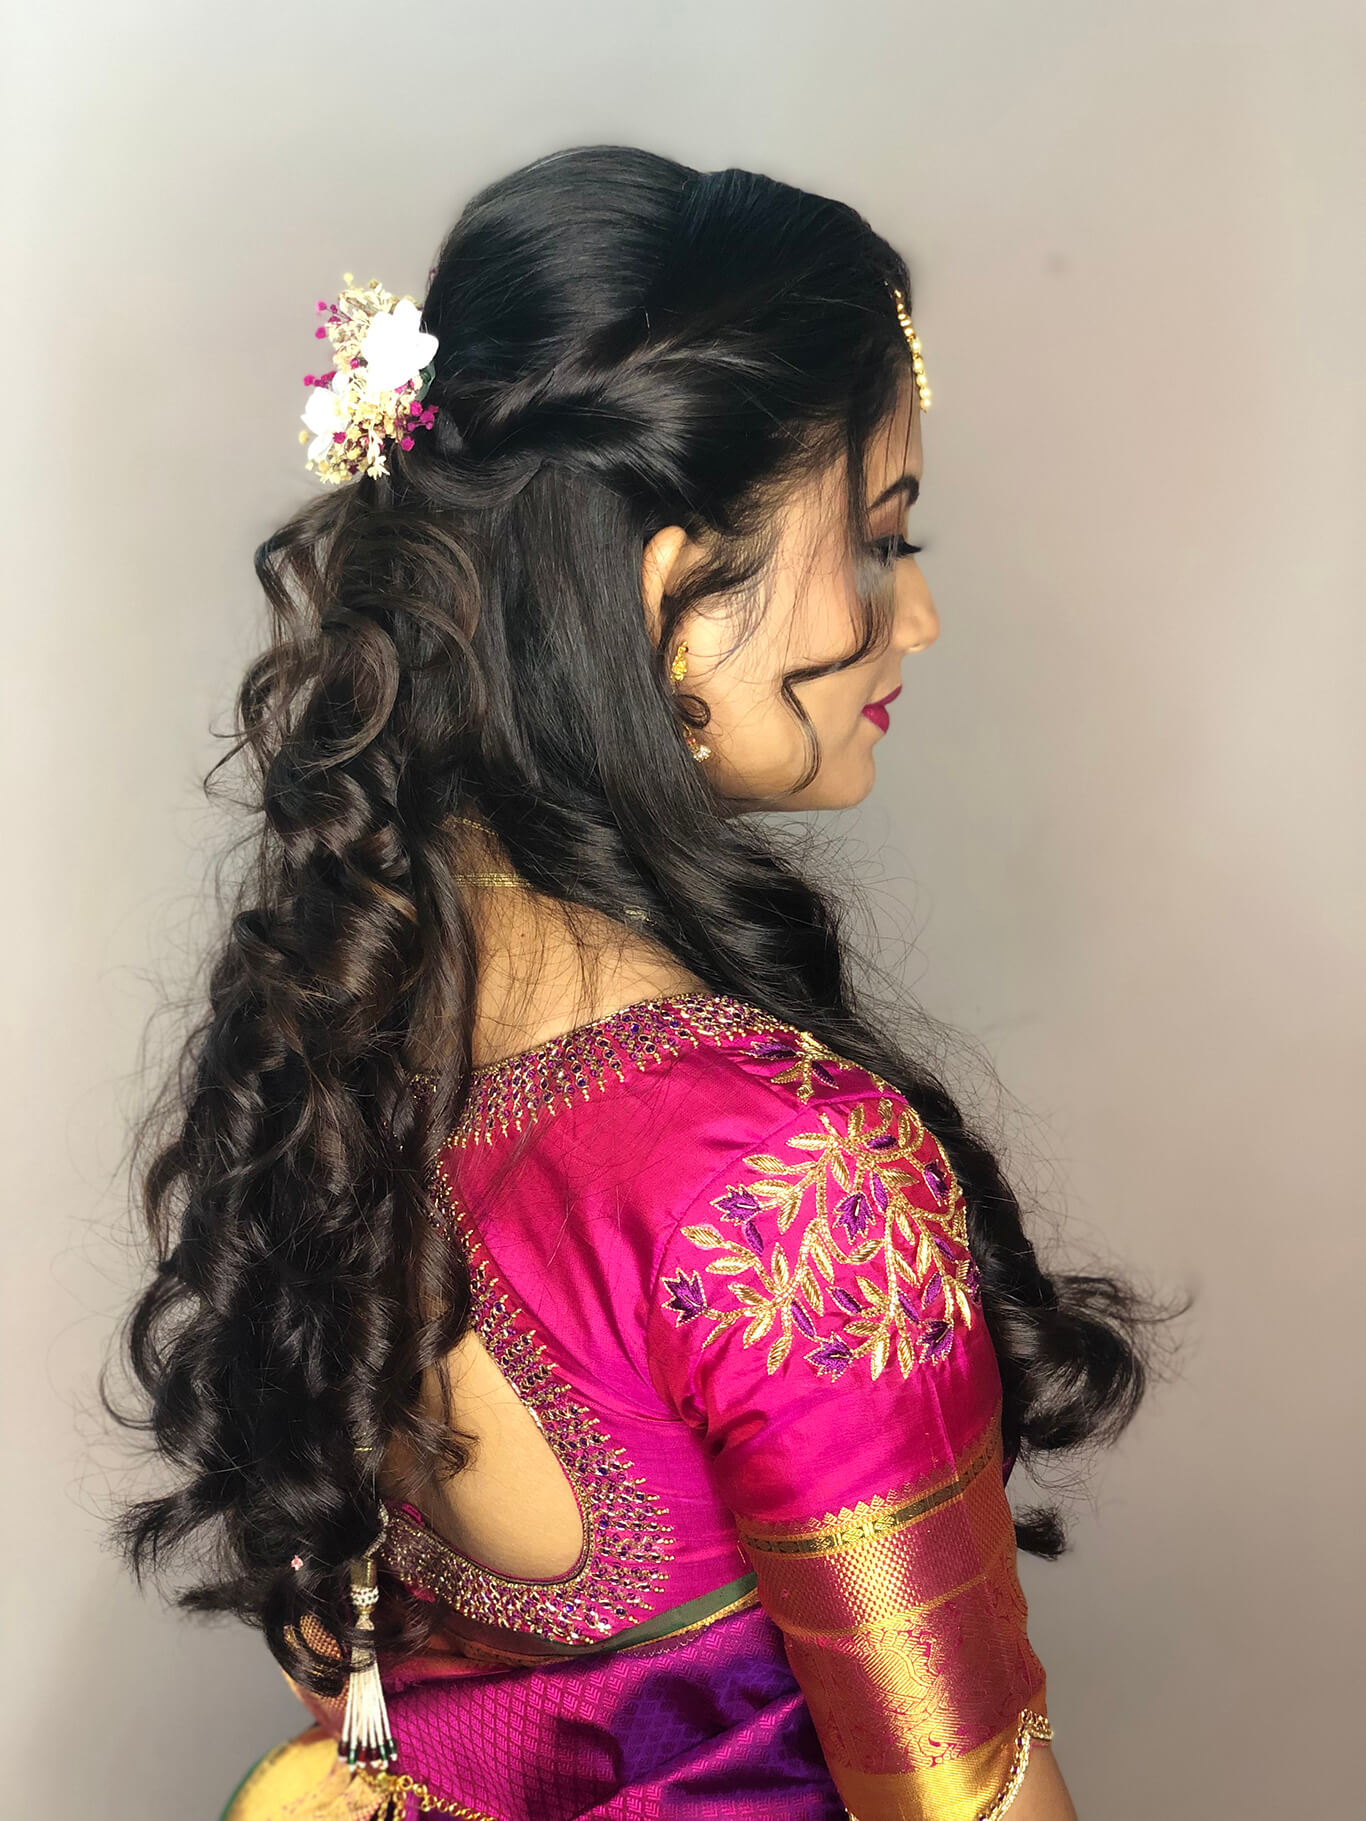 What kind of hairstyle suits for saree? - Quora